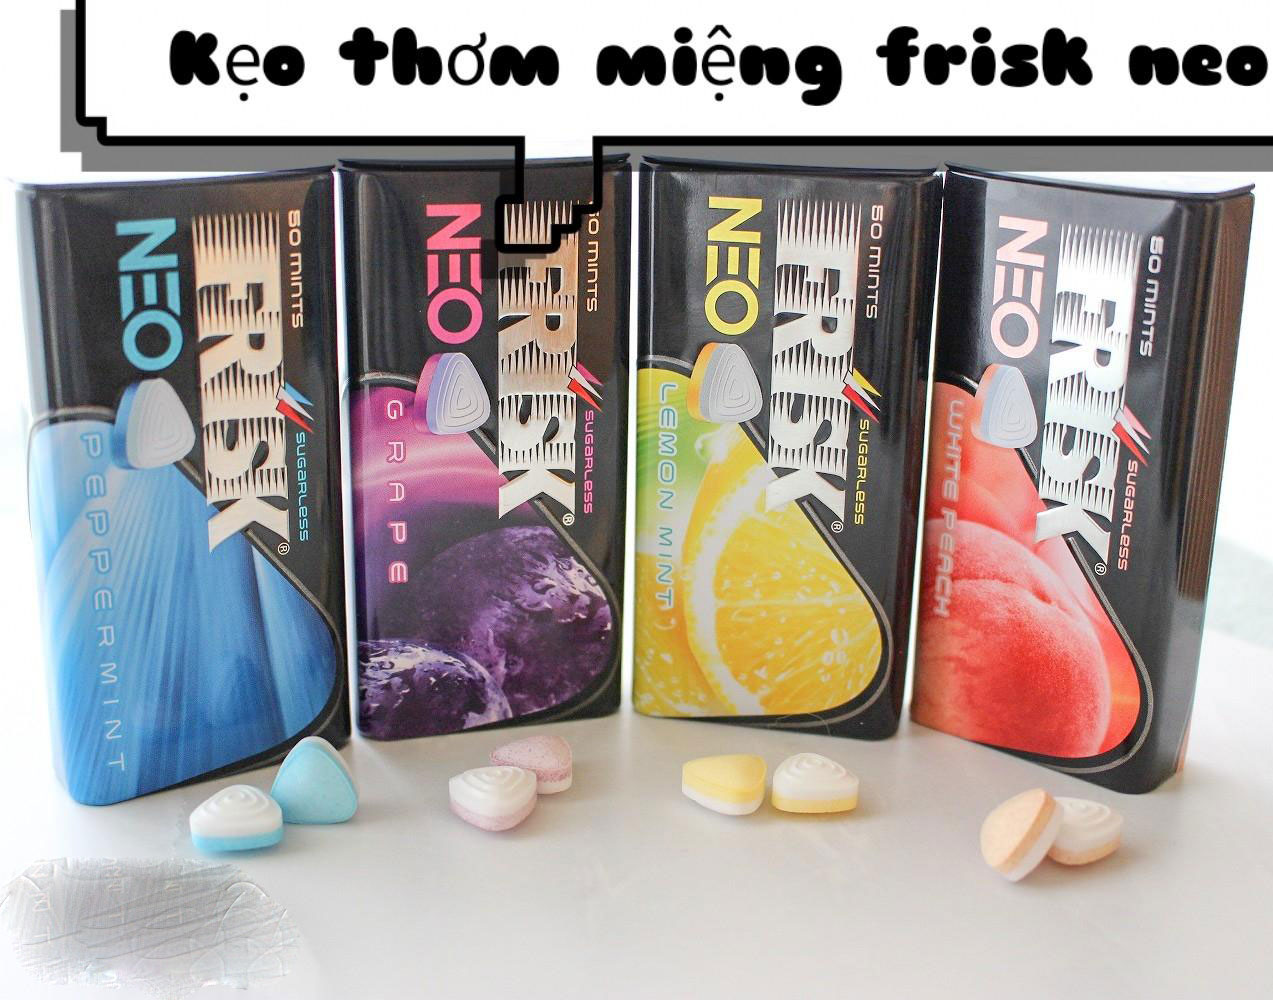 vien-keo-ngam-phong-the-frisk-neo-peppermint-35g-nhat-ban-4